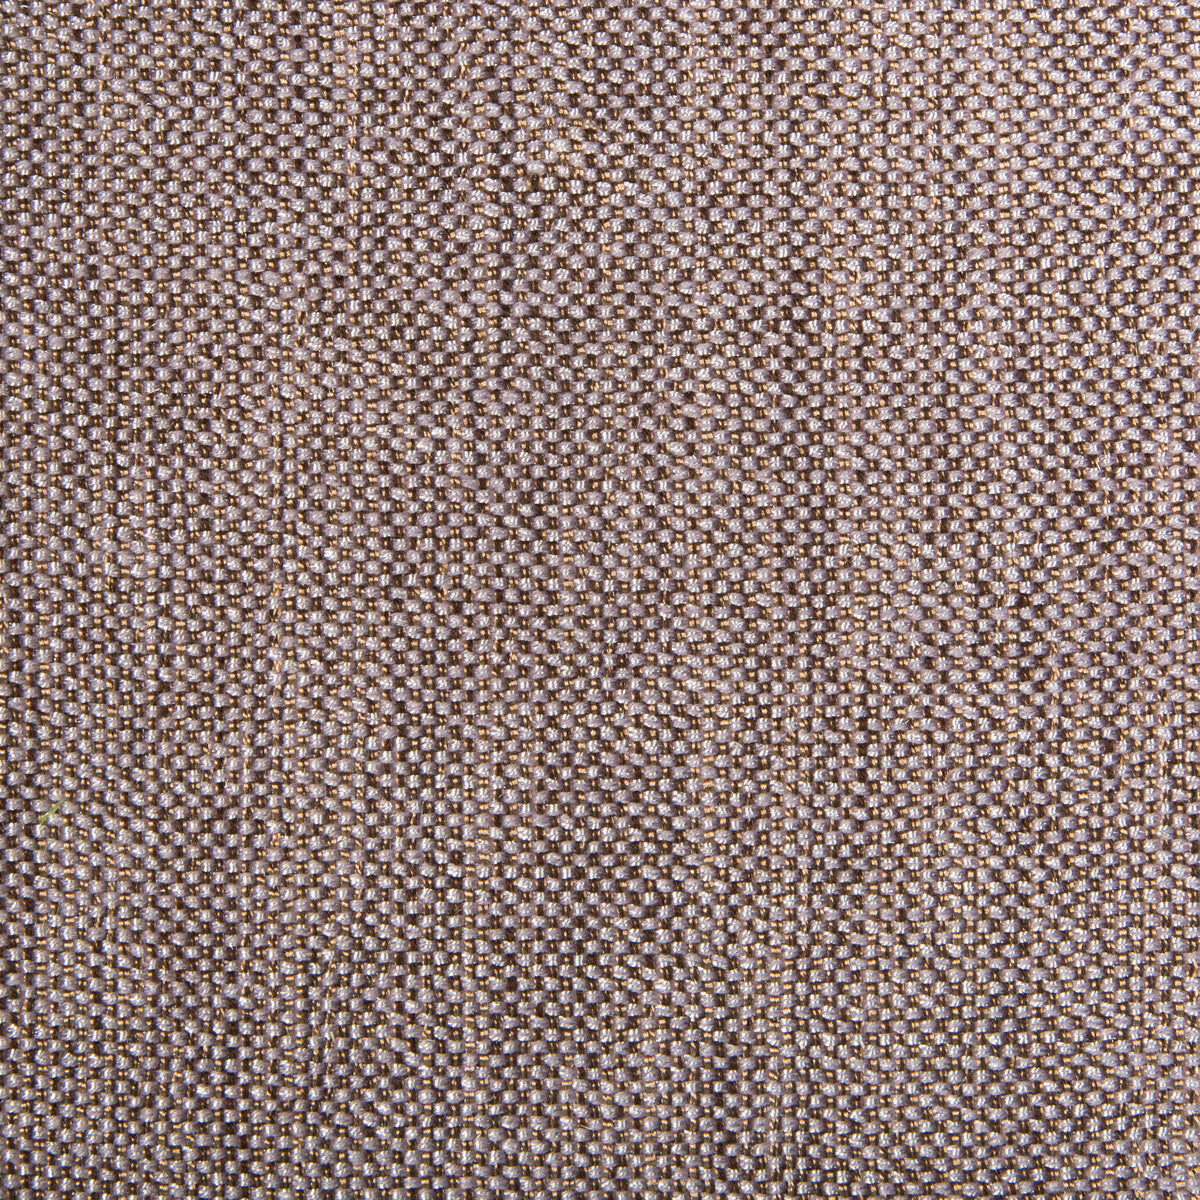 Kravet Contract fabric in 34926-110 color - pattern 34926.110.0 - by Kravet Contract